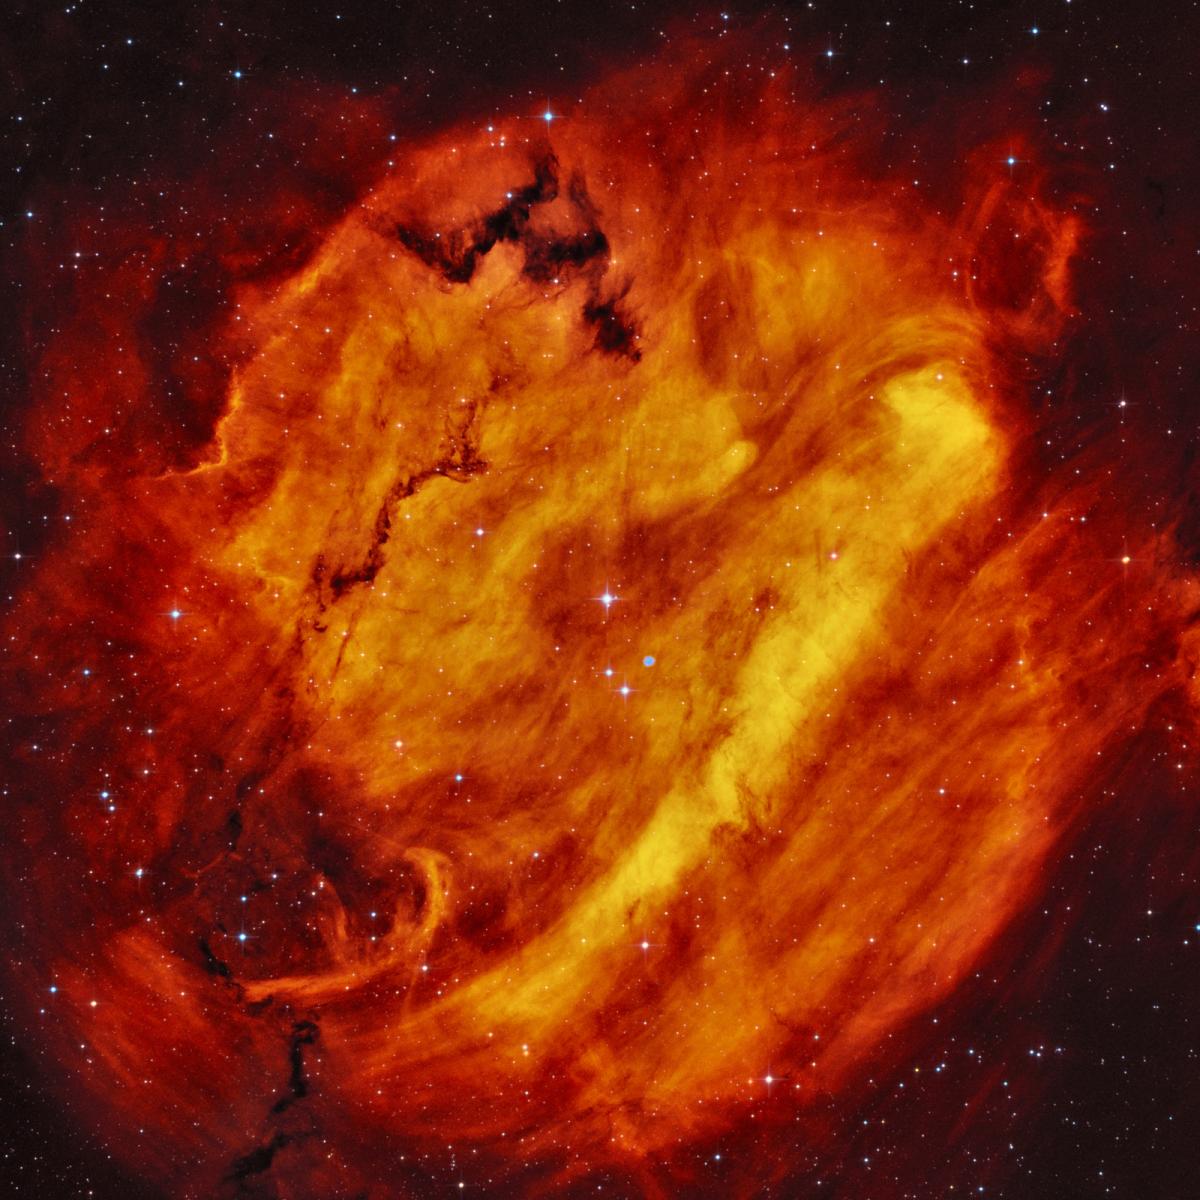 Image showing a nebula that resembles a flame, with big swirling clouds of reds, hot oranges, and yellows against a black starry night sky